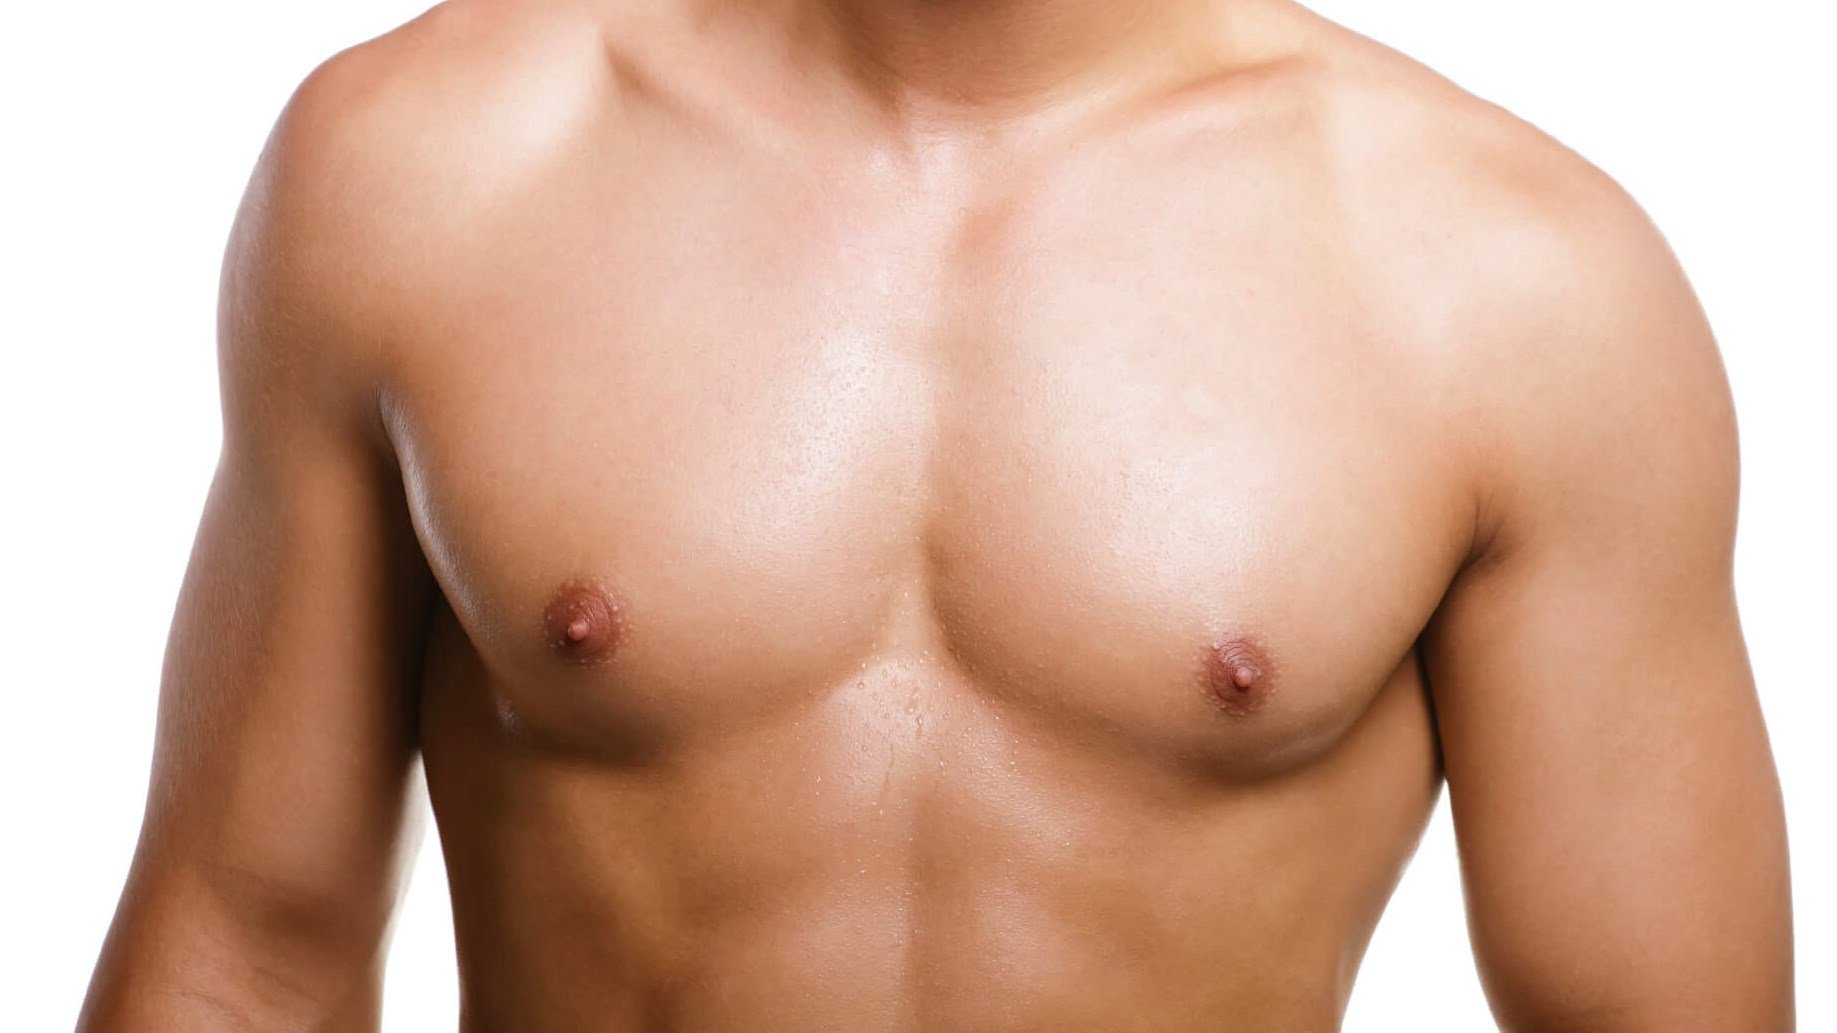 Can Gynecomastia Appear On Only One Side?